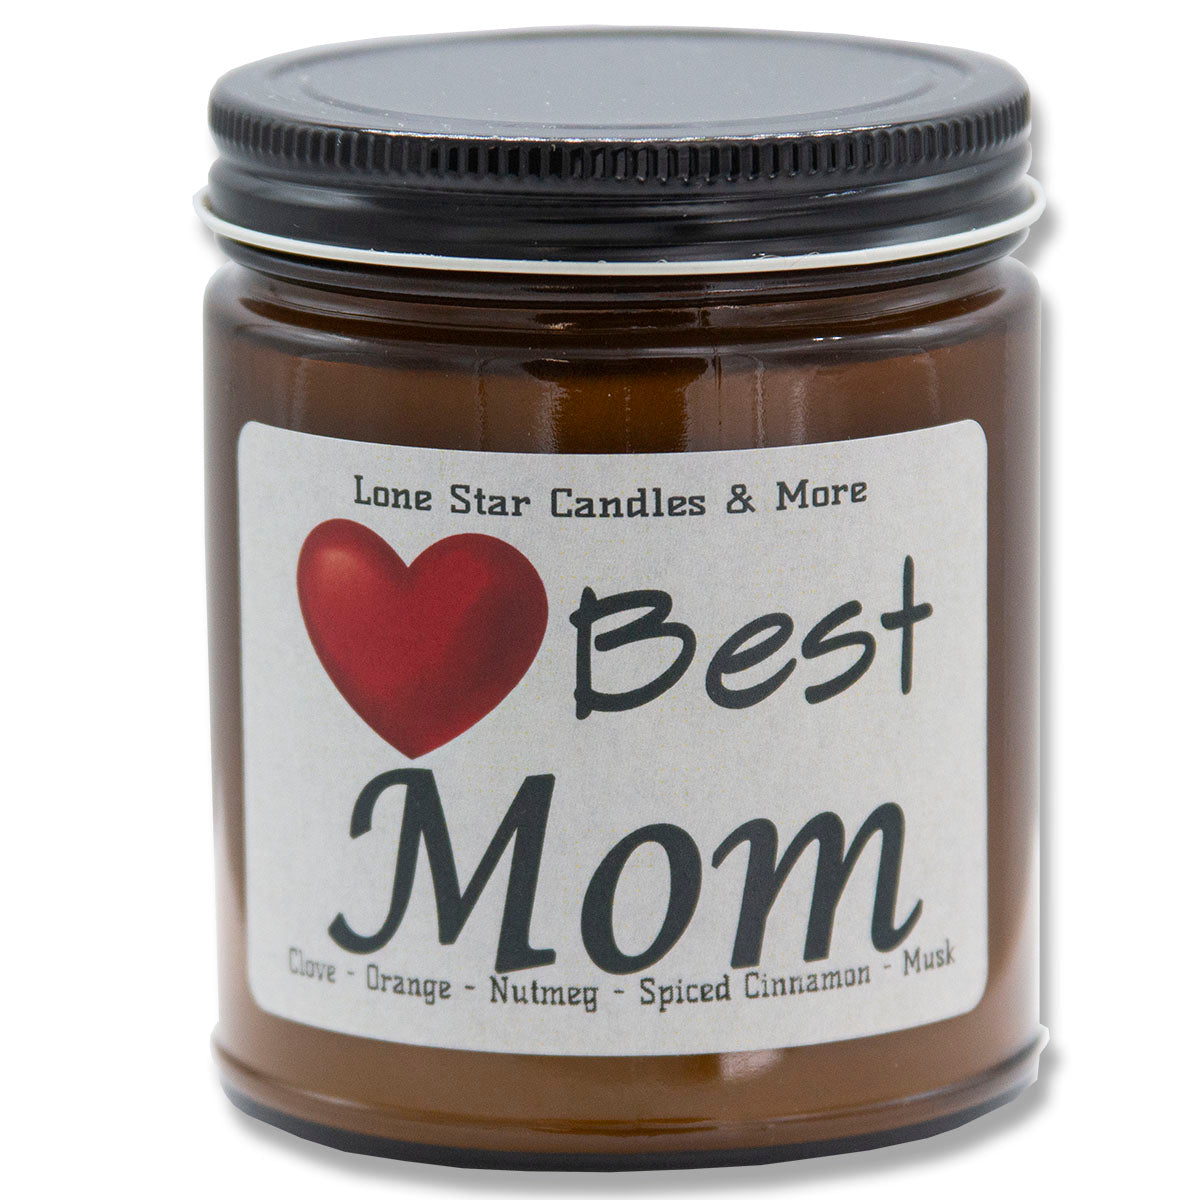 Autumn Cider, Lone Star Candles & More's Premium Hand Poured Strongly Scented Soy Wax Gift Candle, Fall Spices, Sweet Musk, & A Hint of Pineapple, US Made in Texas, Amber Glass Jar 9oz Best Mom